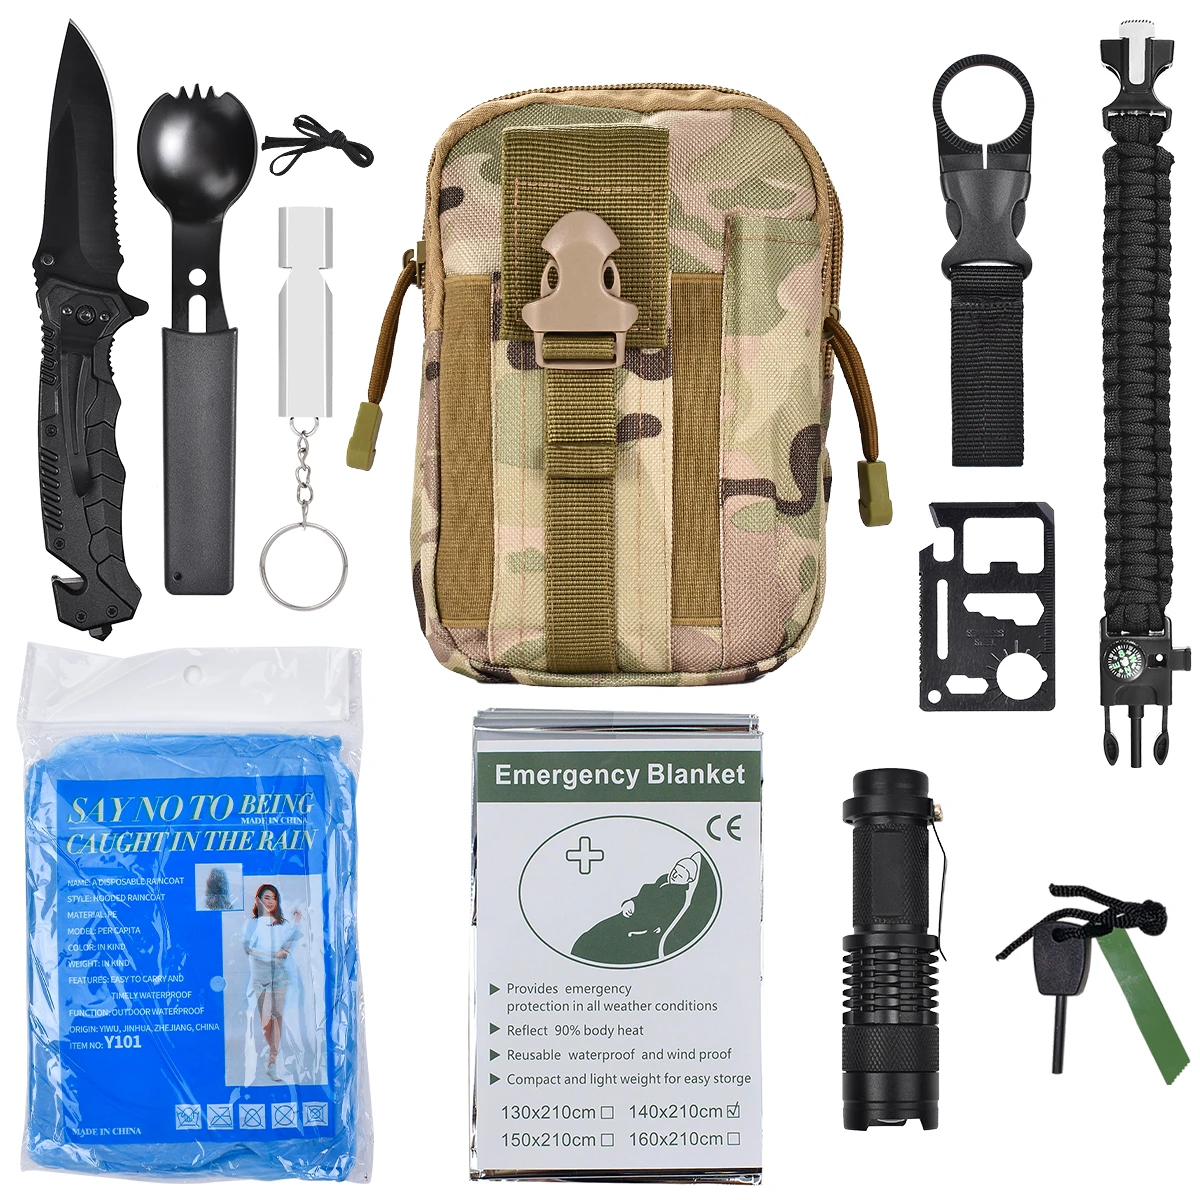 15 In 1 Multifunction Outdoor Tactical Camping Gear Tools Set Earthquake Emergency Survival Gear Kit For Wilderness Hiking